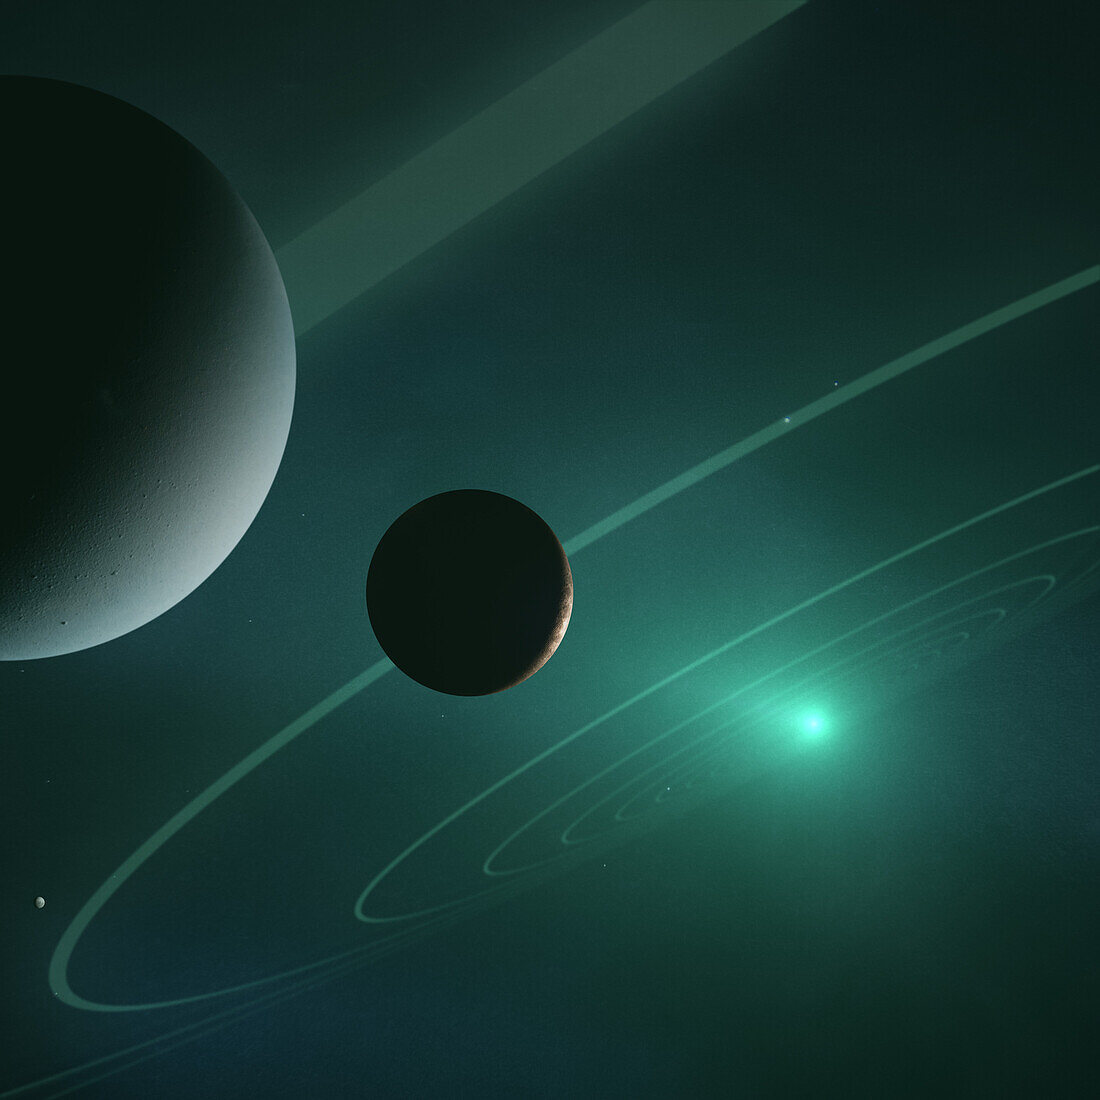 Exoplanets in orbital system, composite image